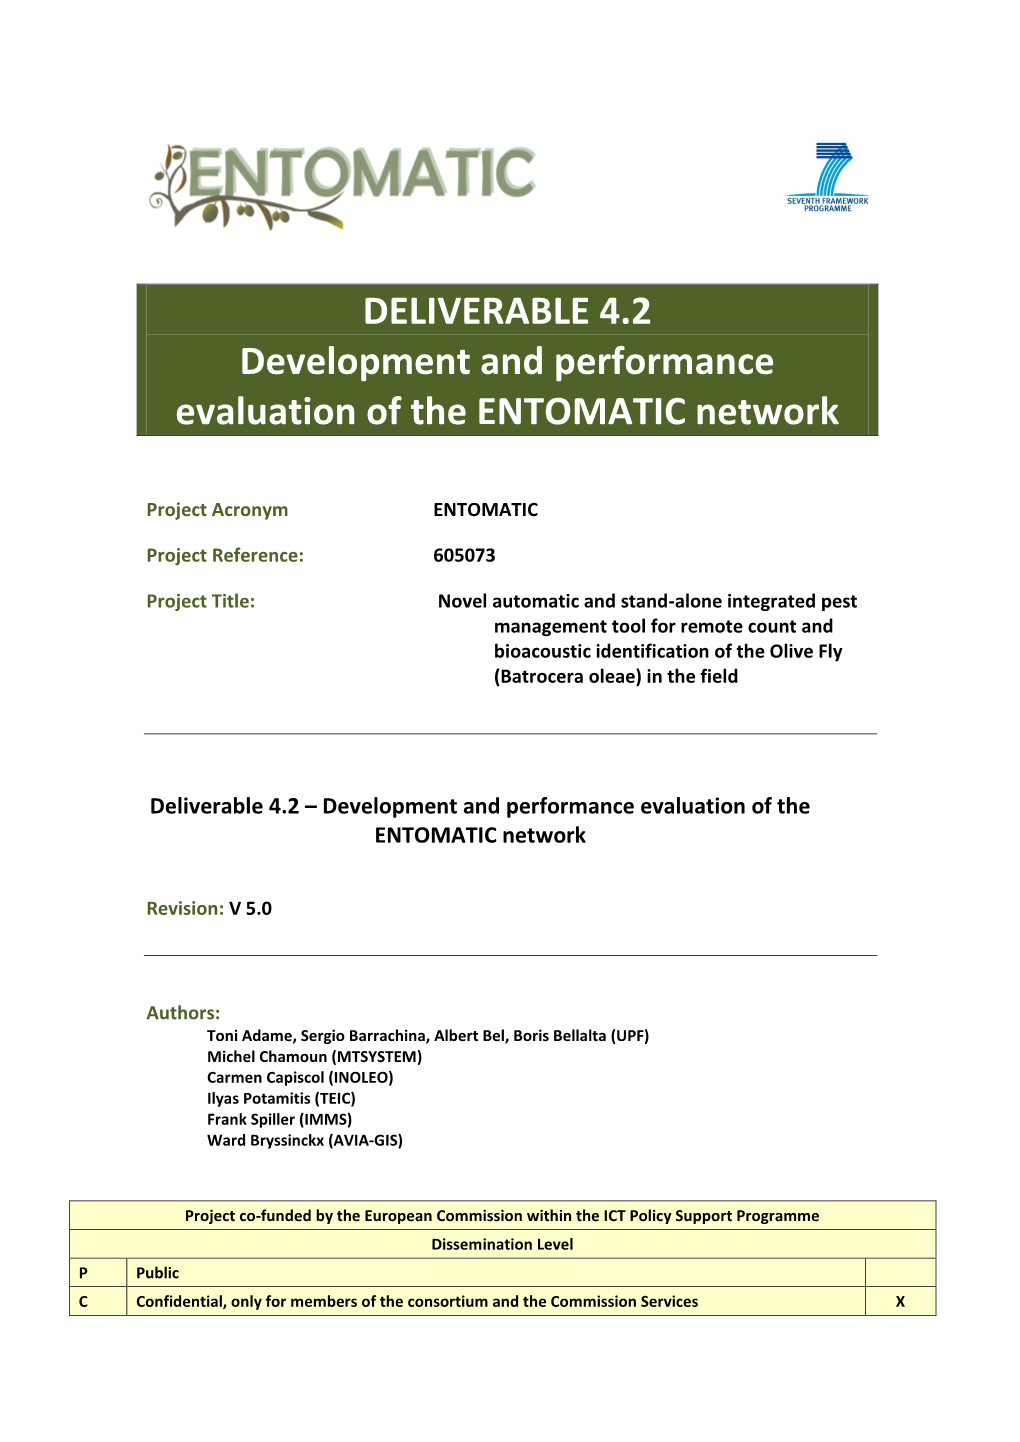 DELIVERABLE 4.2 Development and Performance Evaluation of the ENTOMATIC Network